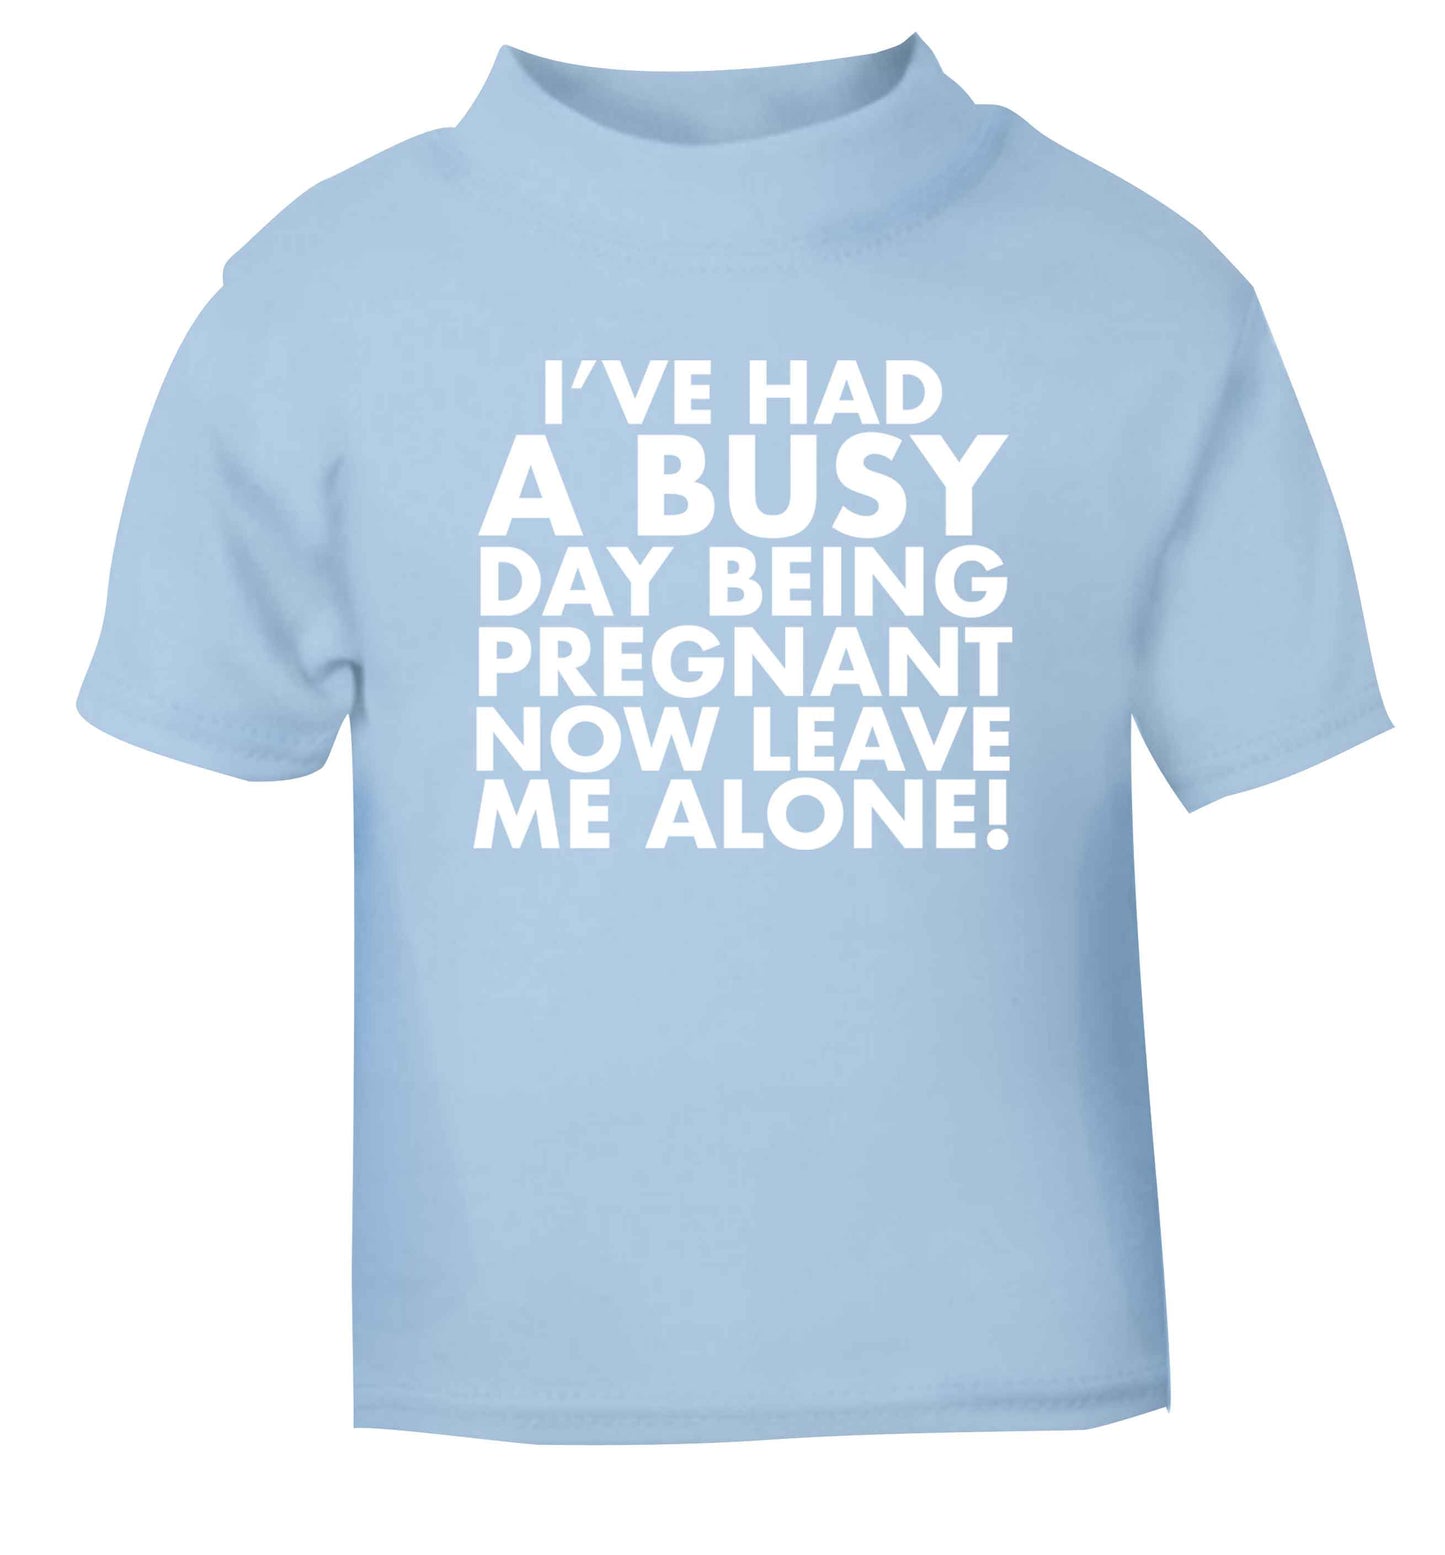 I've had a busy day being pregnant now leave me alone light blue Baby Toddler Tshirt 2 Years